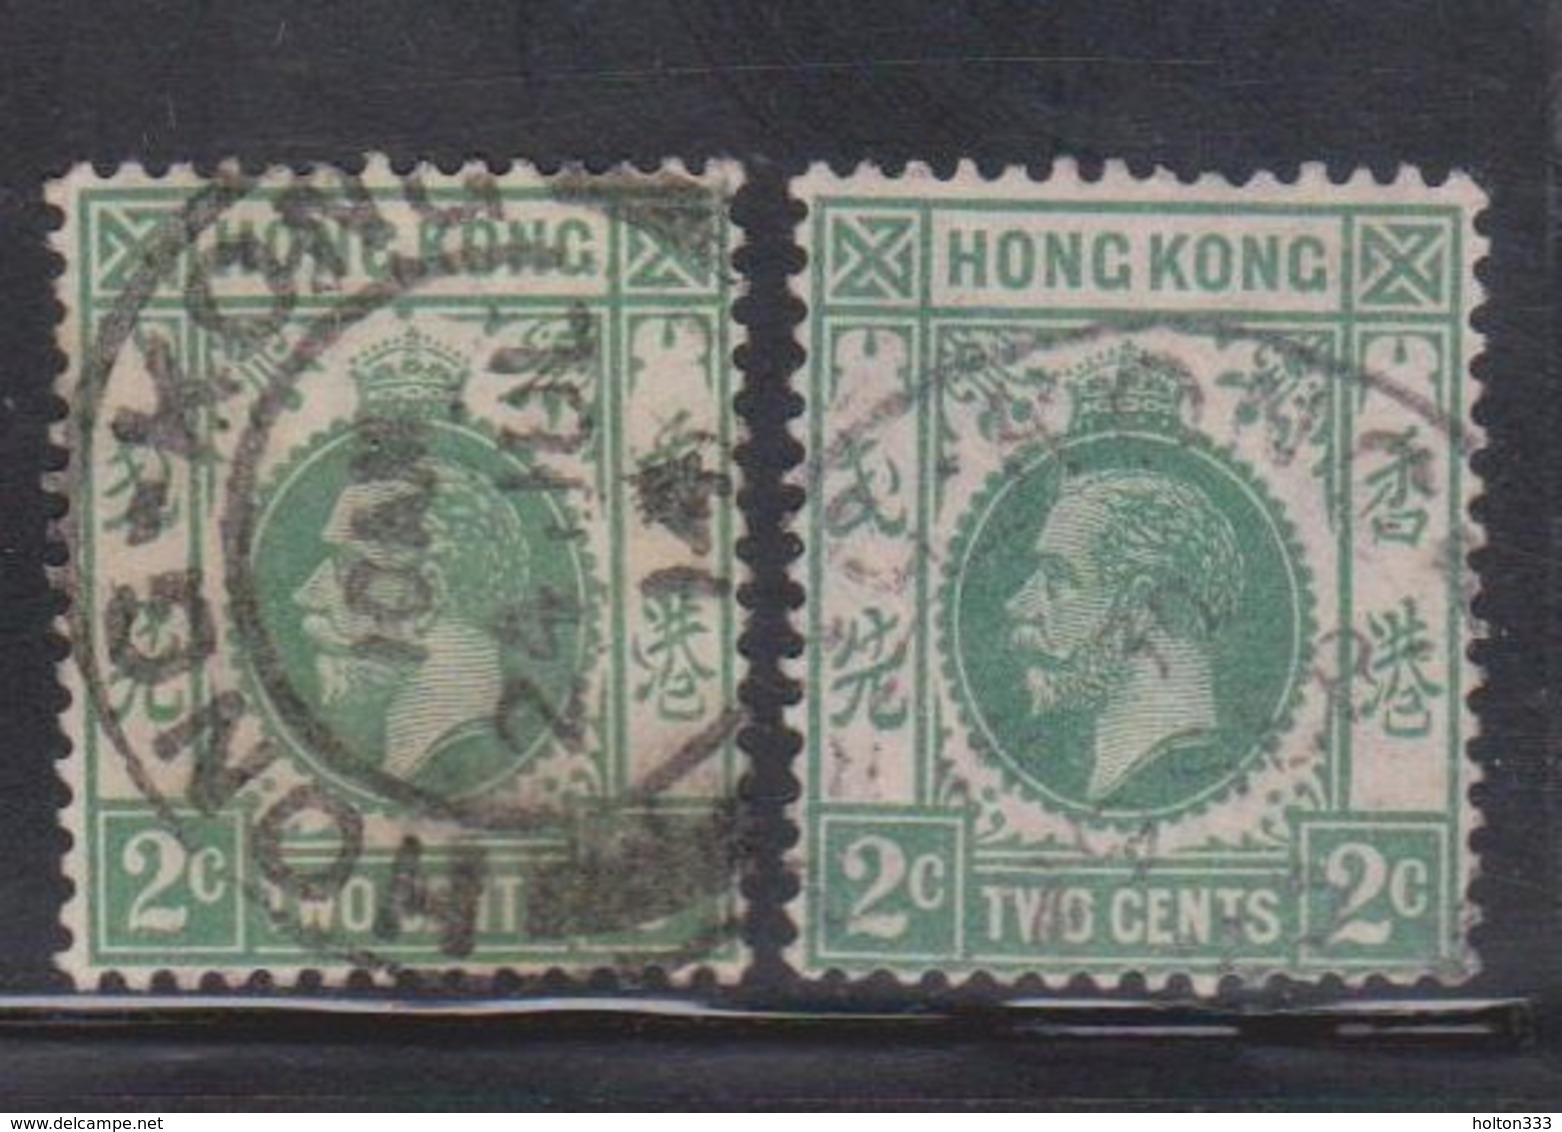 HONG KONG Scott # 110, 130 Used - King George V Watermarks 3 & 4 - Used Stamps